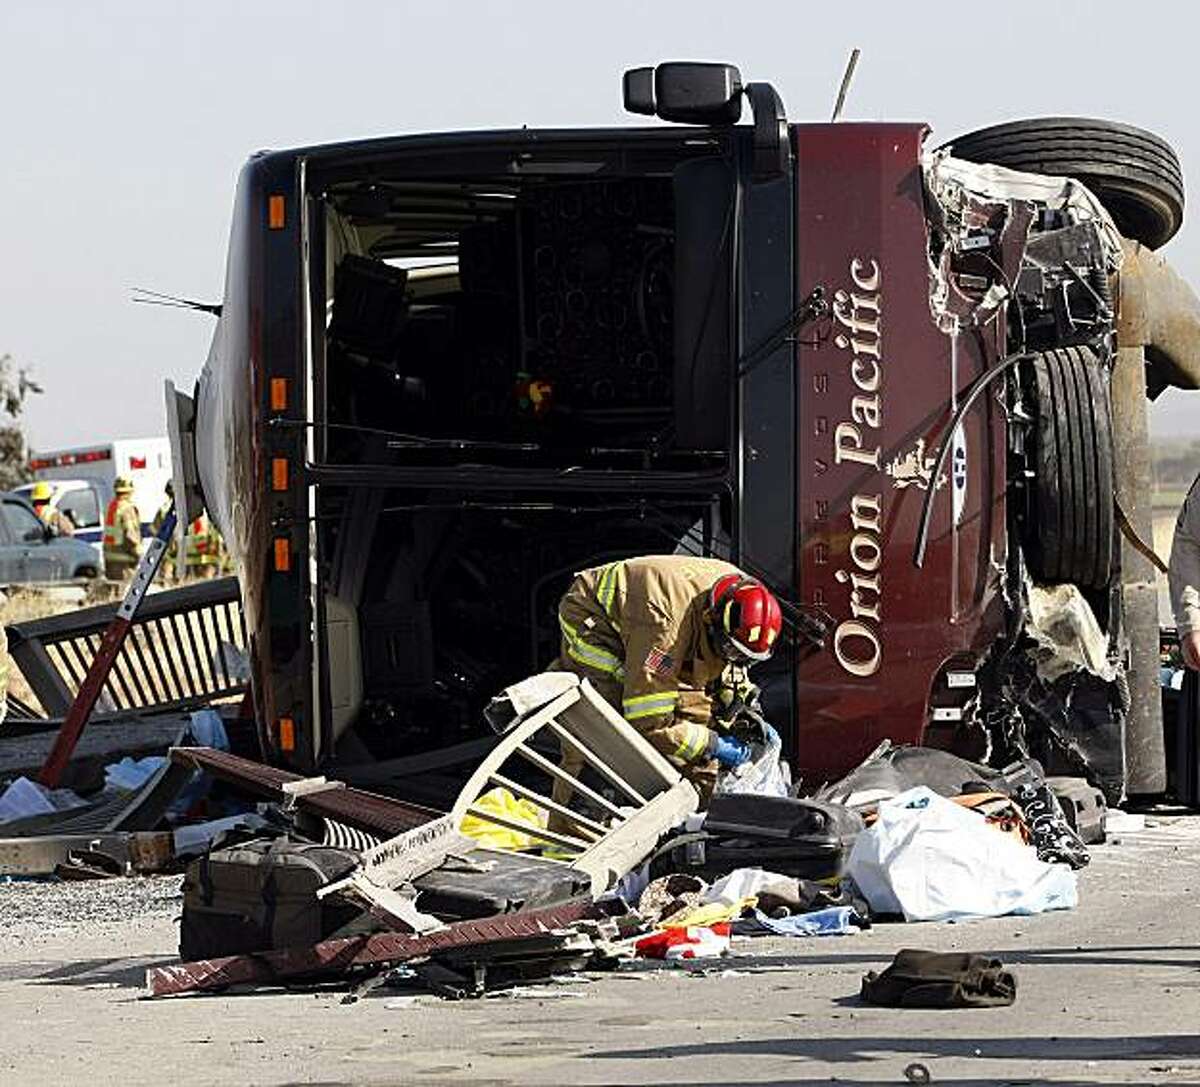 In this April 28, 2009 file photo, the scene of a multi-fatal accident involving a tour bus traveling south on Highway 101 near Soledad, Calif., is seen. Fatigue may have played a role in the bus crash last year that killed the vehicle's driver and four French tourists traveling through California on vacation, authorities said. (Monterey County herald, Vern Fisher)